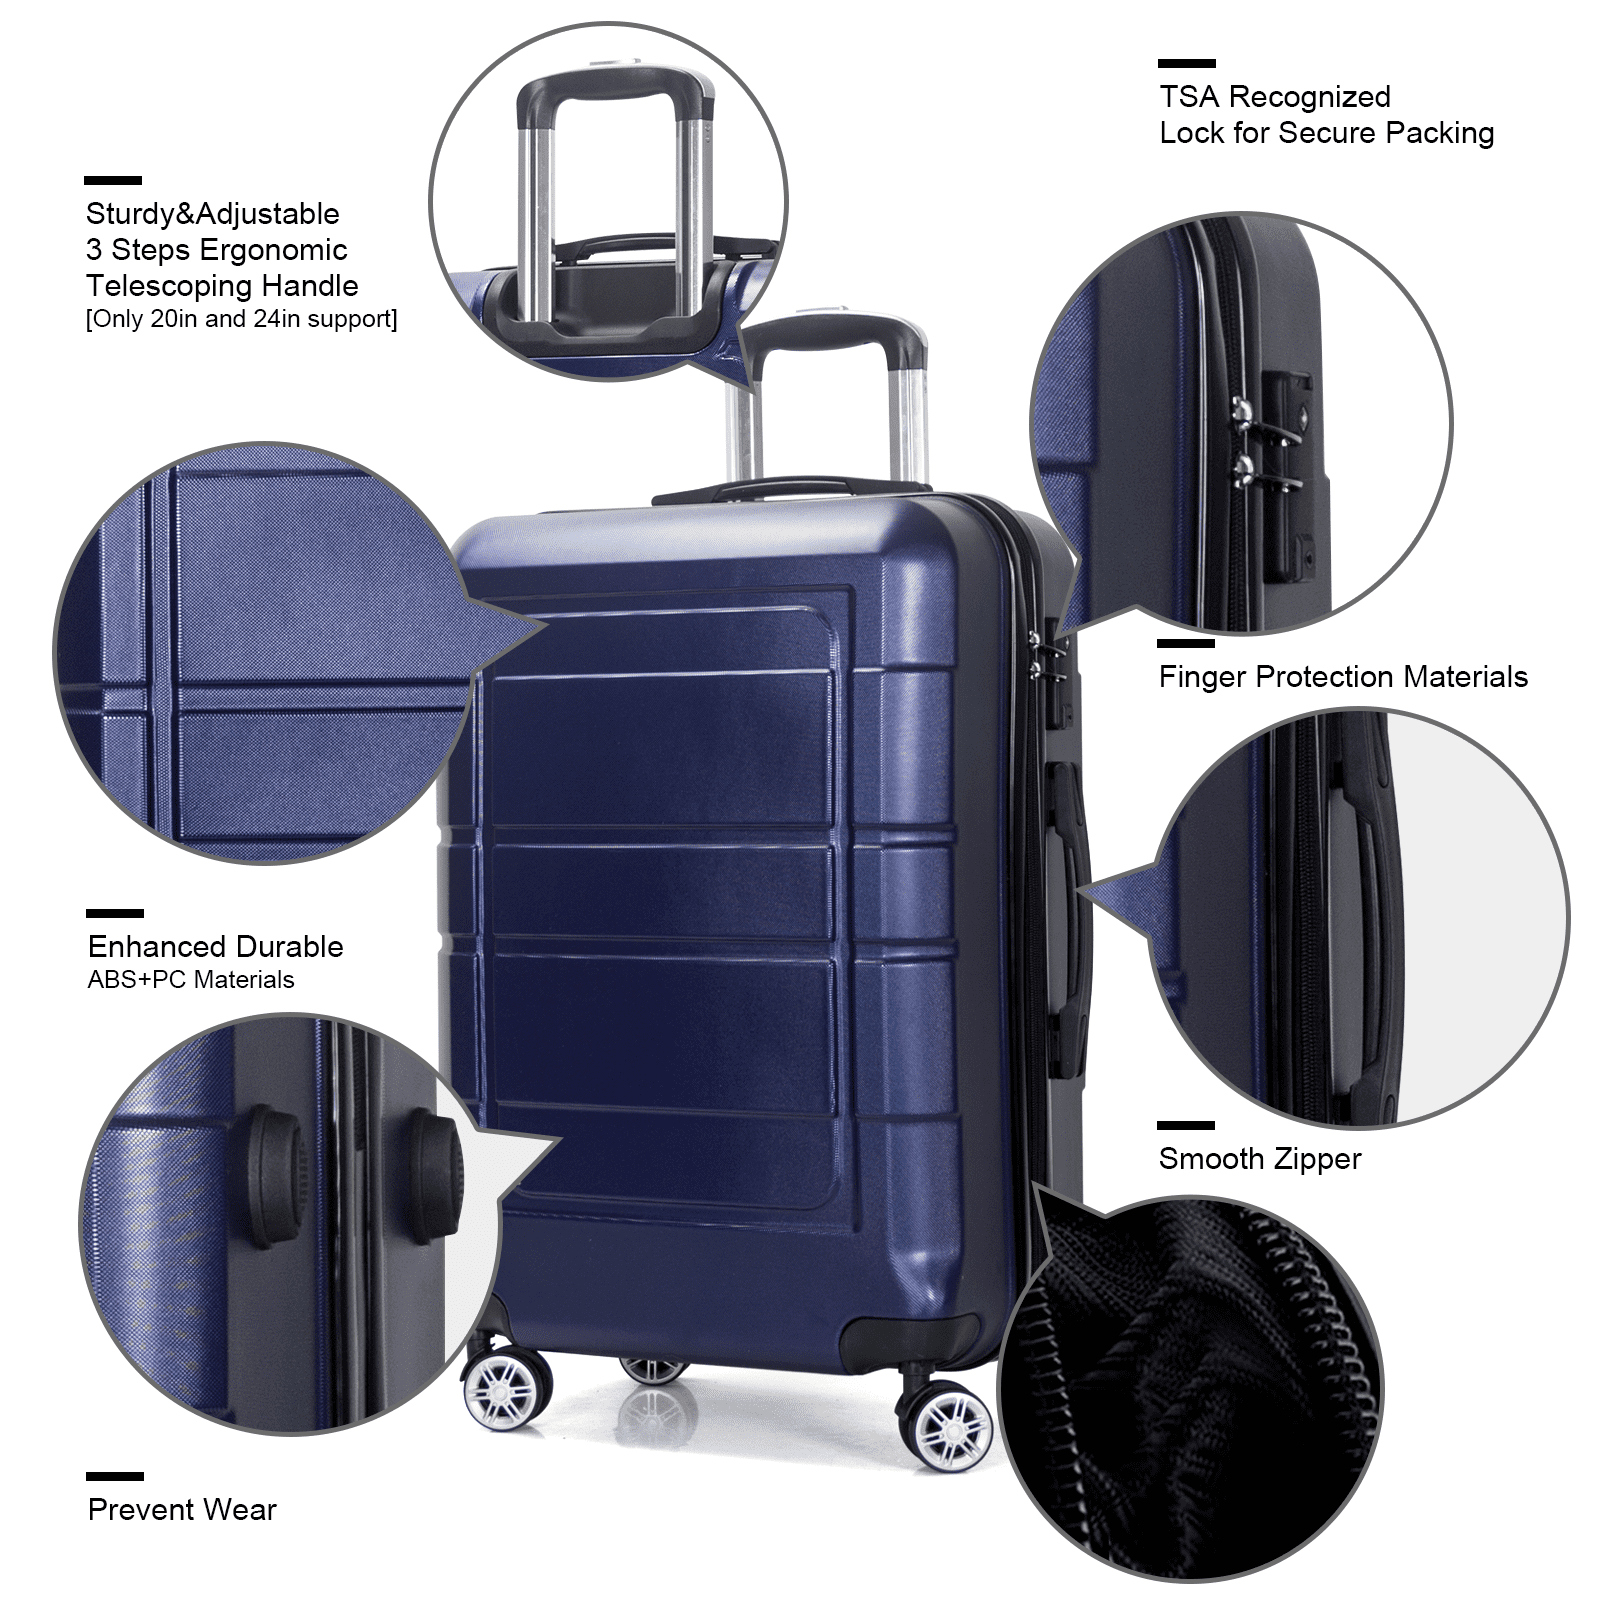 New JZRSuitcase Lightweight Luggage PC+ABS Suitcase, Hardshell Suitcases  with Spinner Wheels TSA Lock for Travel, Check-in 24 Inch. for Sale in Los  Angeles, CA - OfferUp